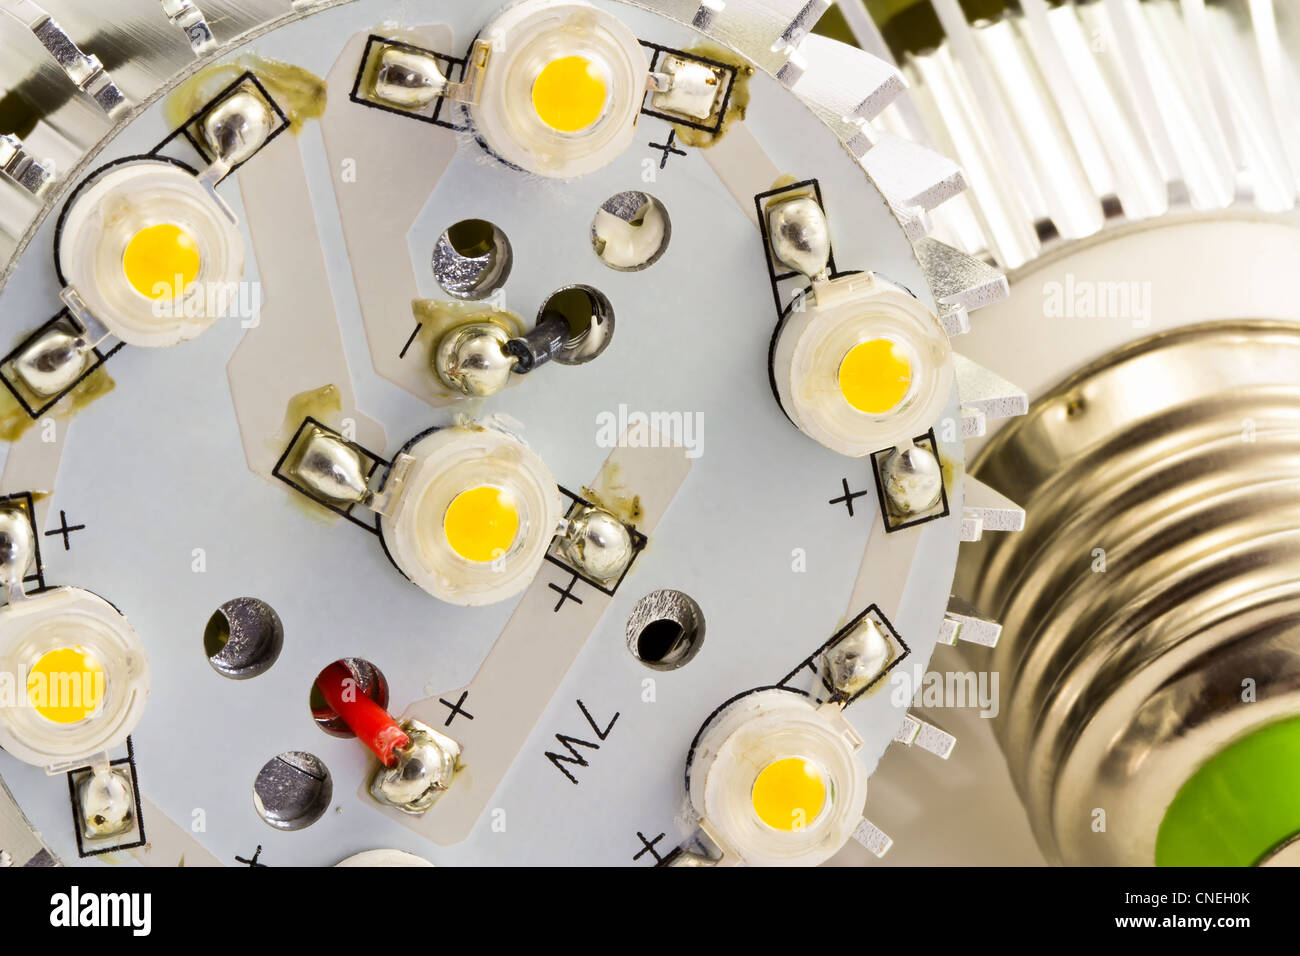 detail of LED light bulbs E27 with 1 Watts SMD chips without cover glass Stock Photo